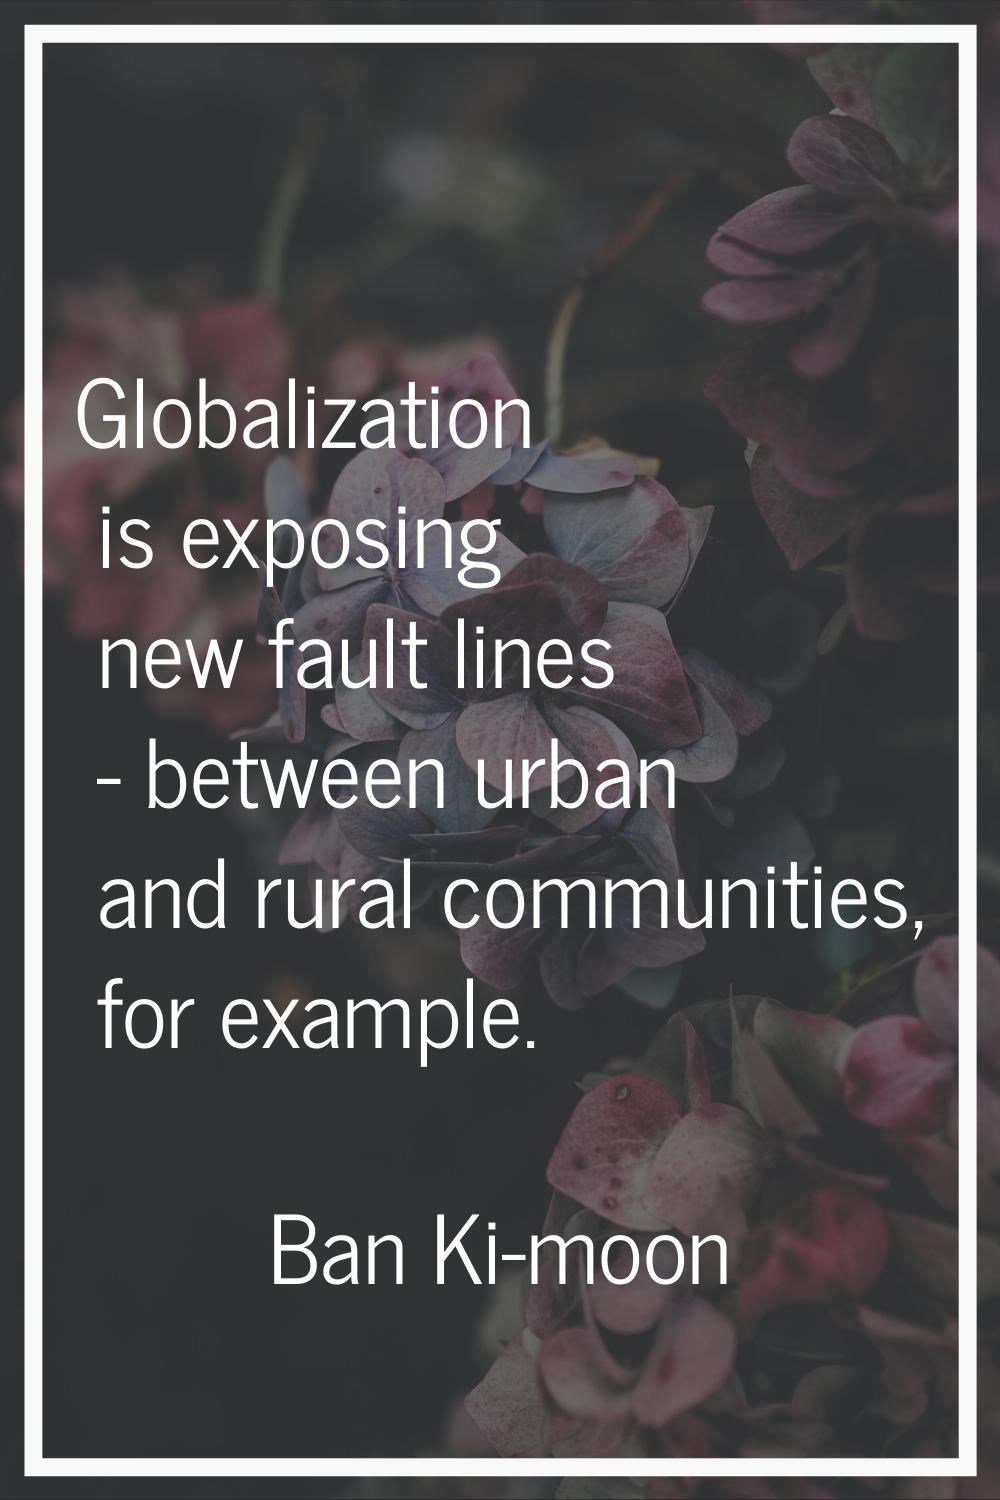 Globalization is exposing new fault lines - between urban and rural communities, for example.